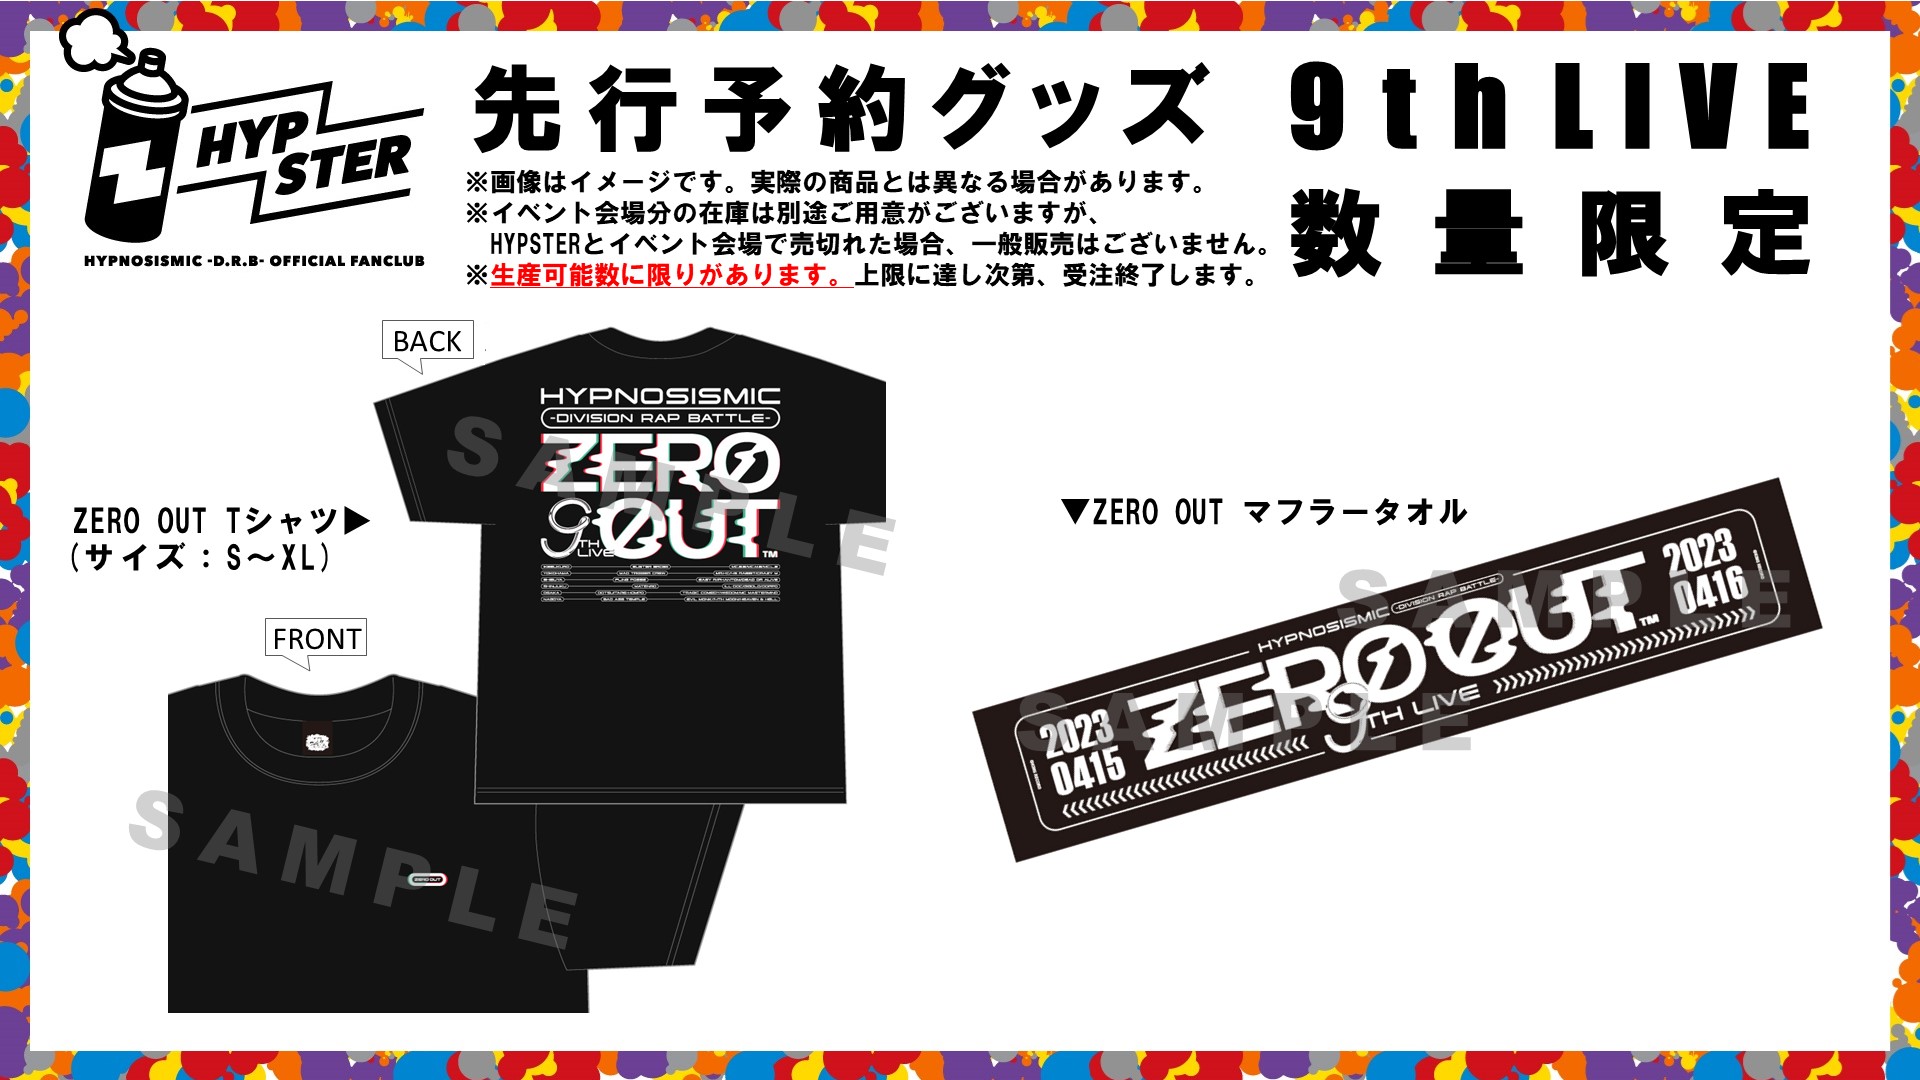 9th LIVE ≪ZERO OUT≫】HYPSTER Limited Store販売情報(1月26日更新 